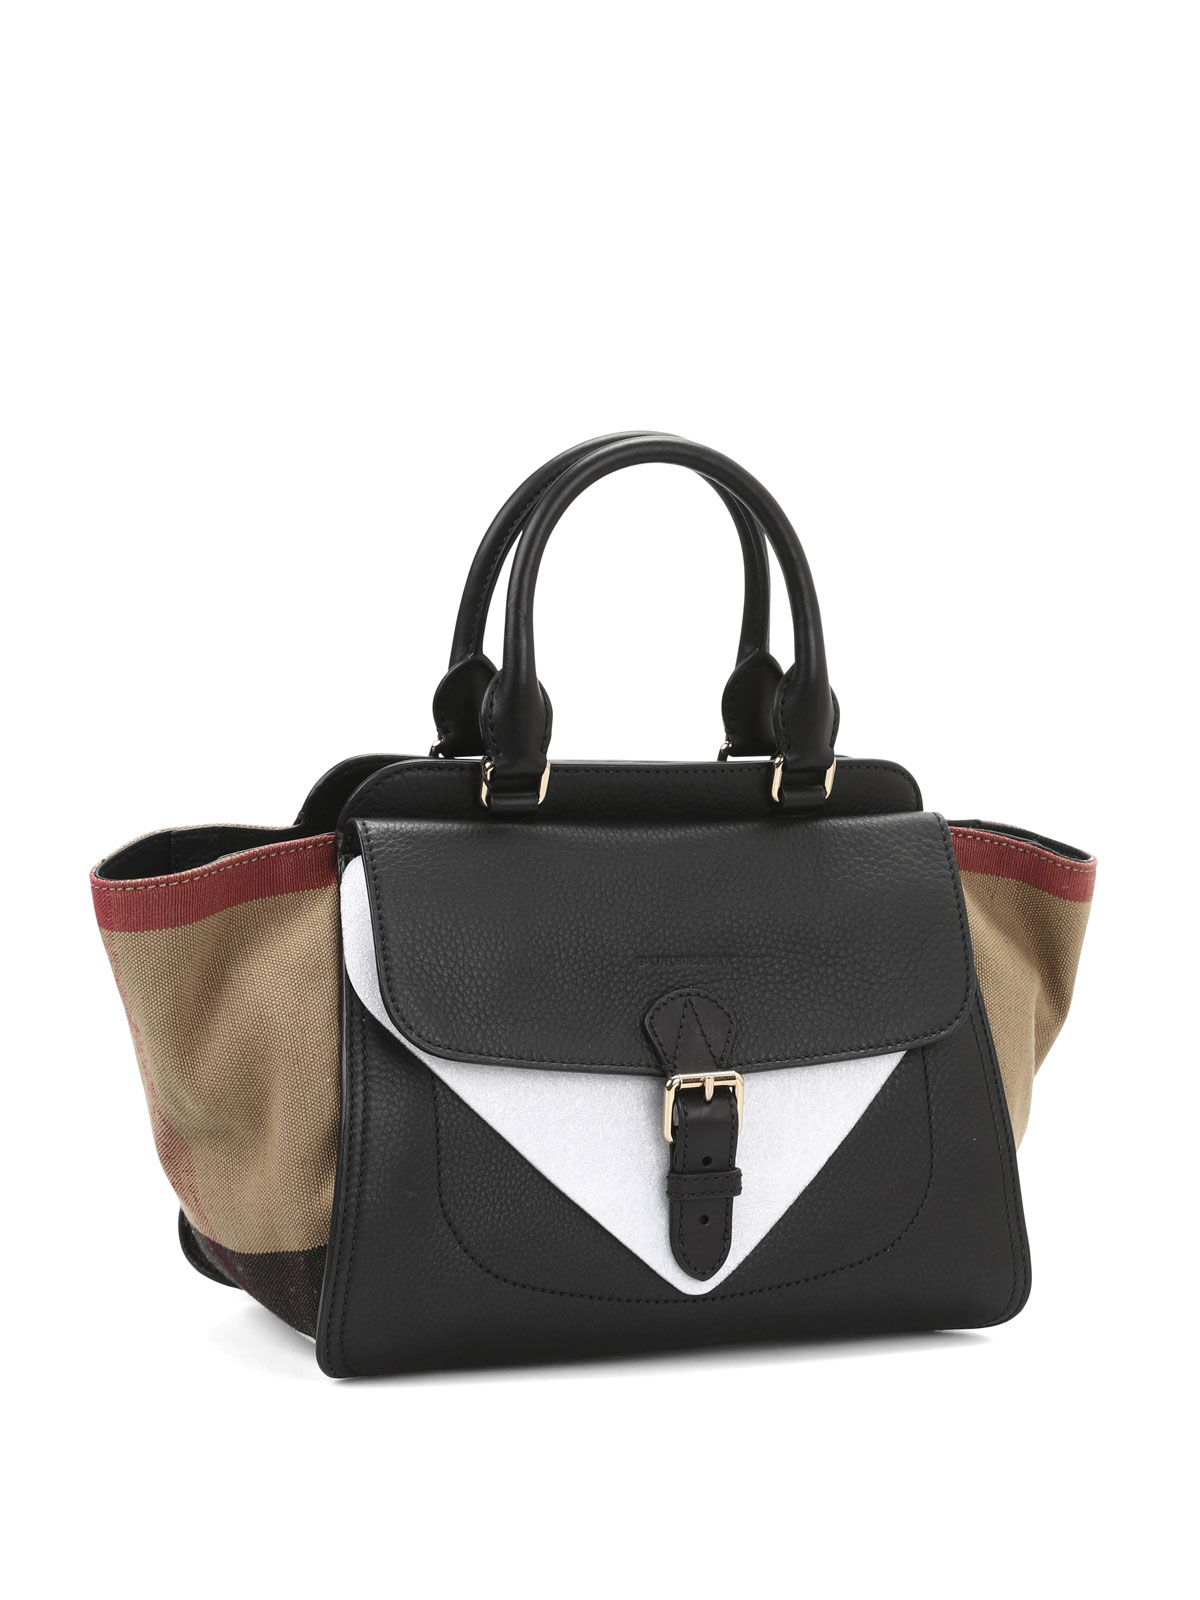 Burberry - Harcourt tote - totes bags 